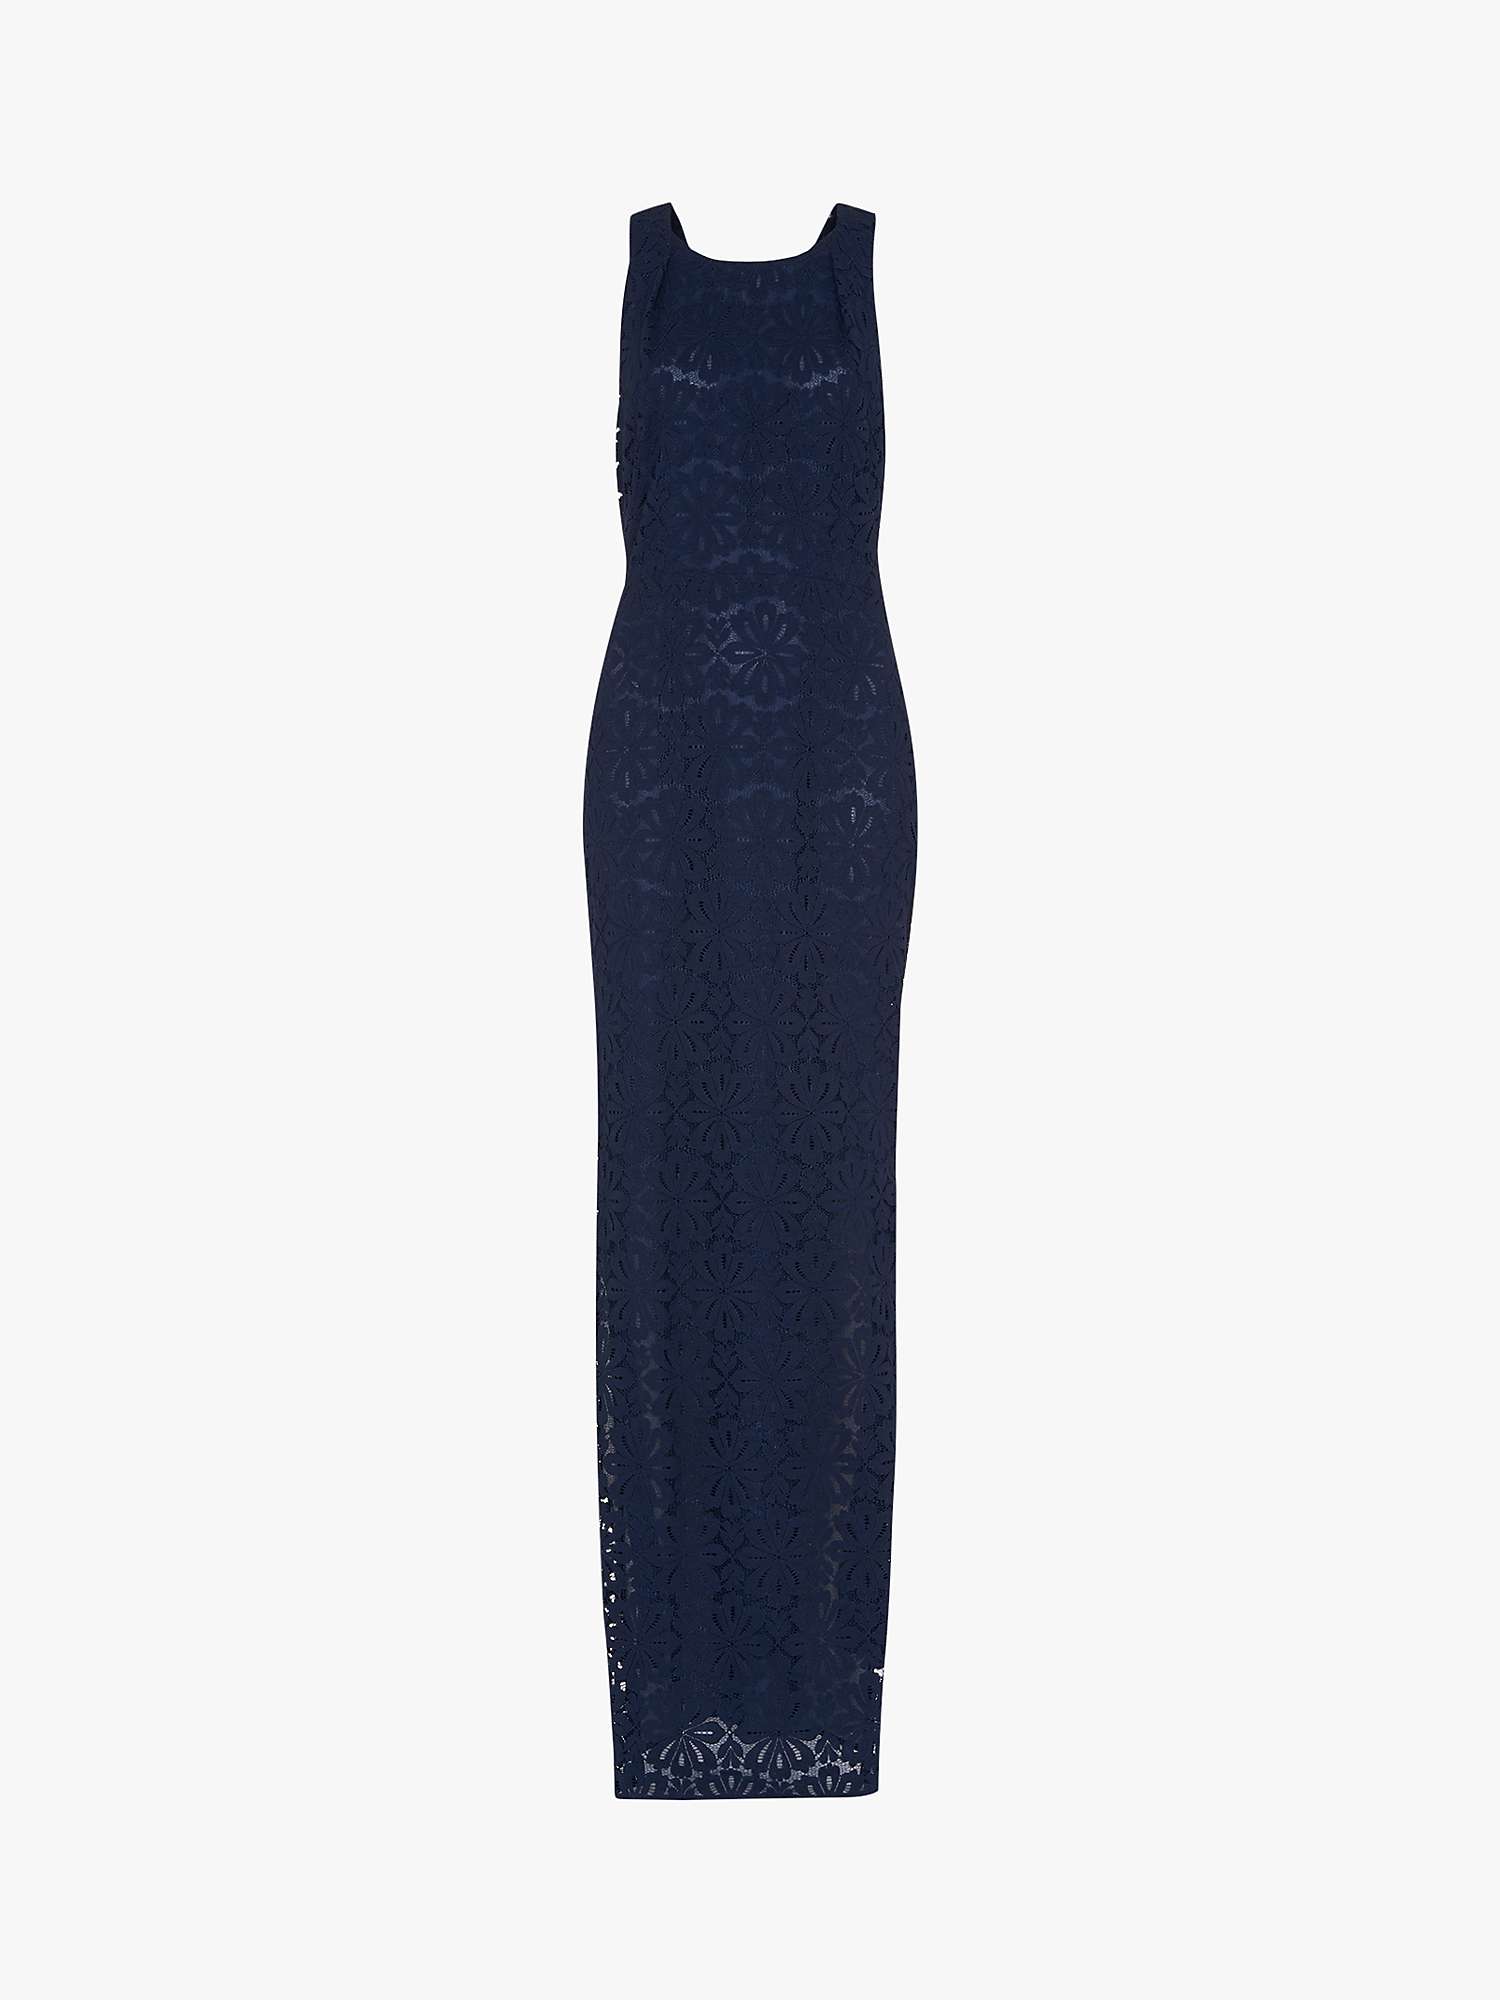 Buy Whistles  Lace Tie Back Maxi Dress, Navy Online at johnlewis.com